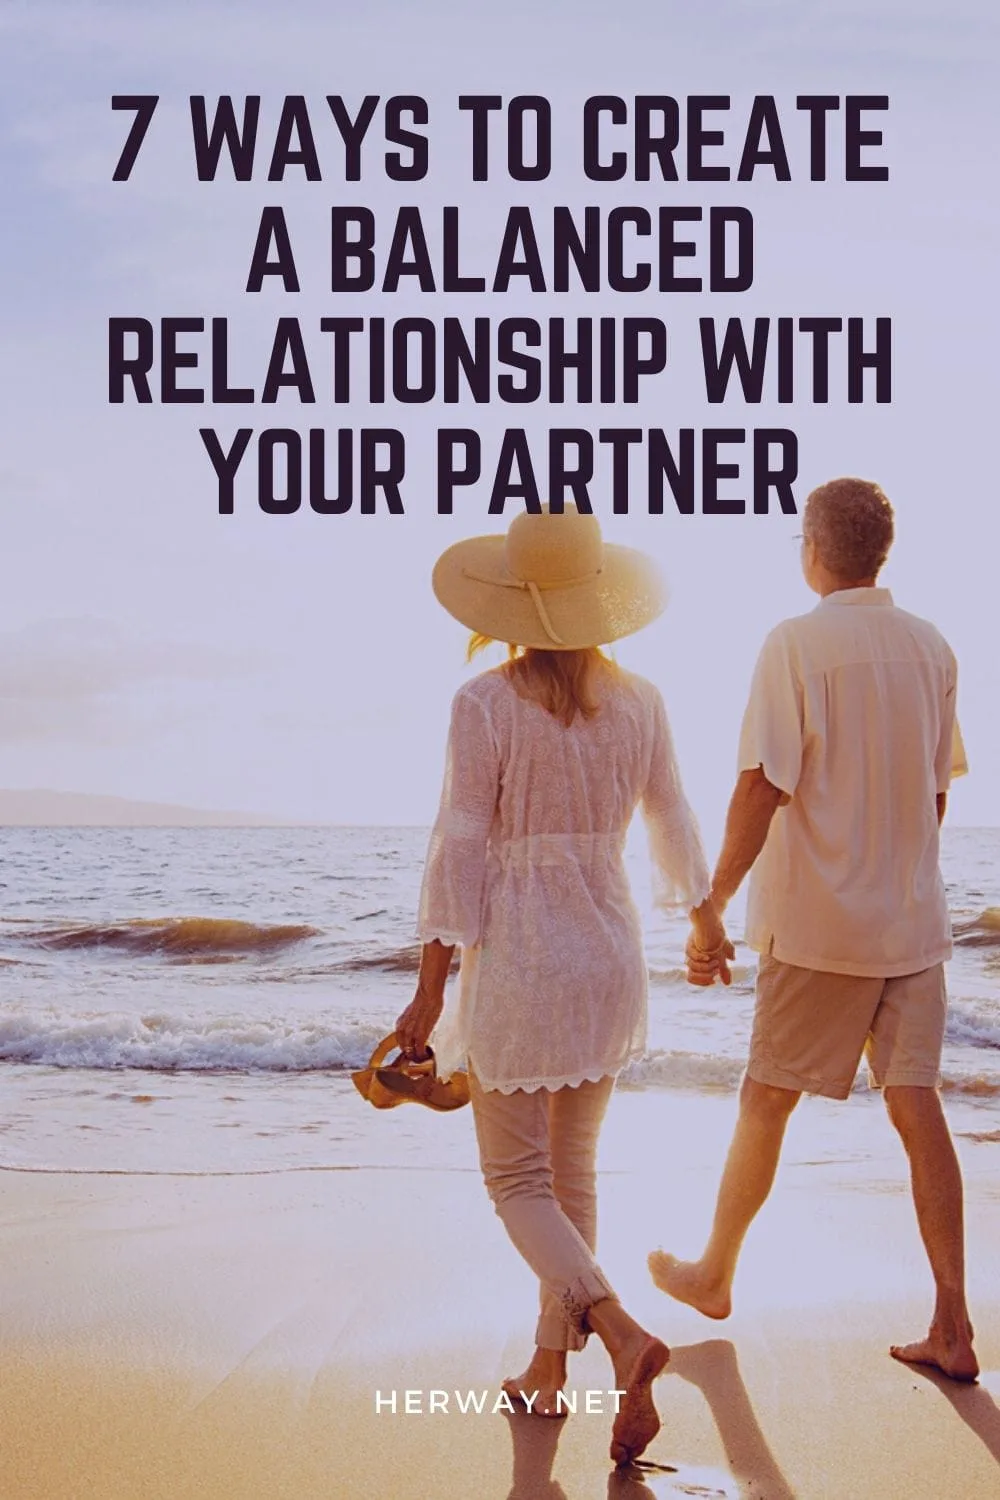 7 Ways To Create A Balanced Relationship With Your Partner